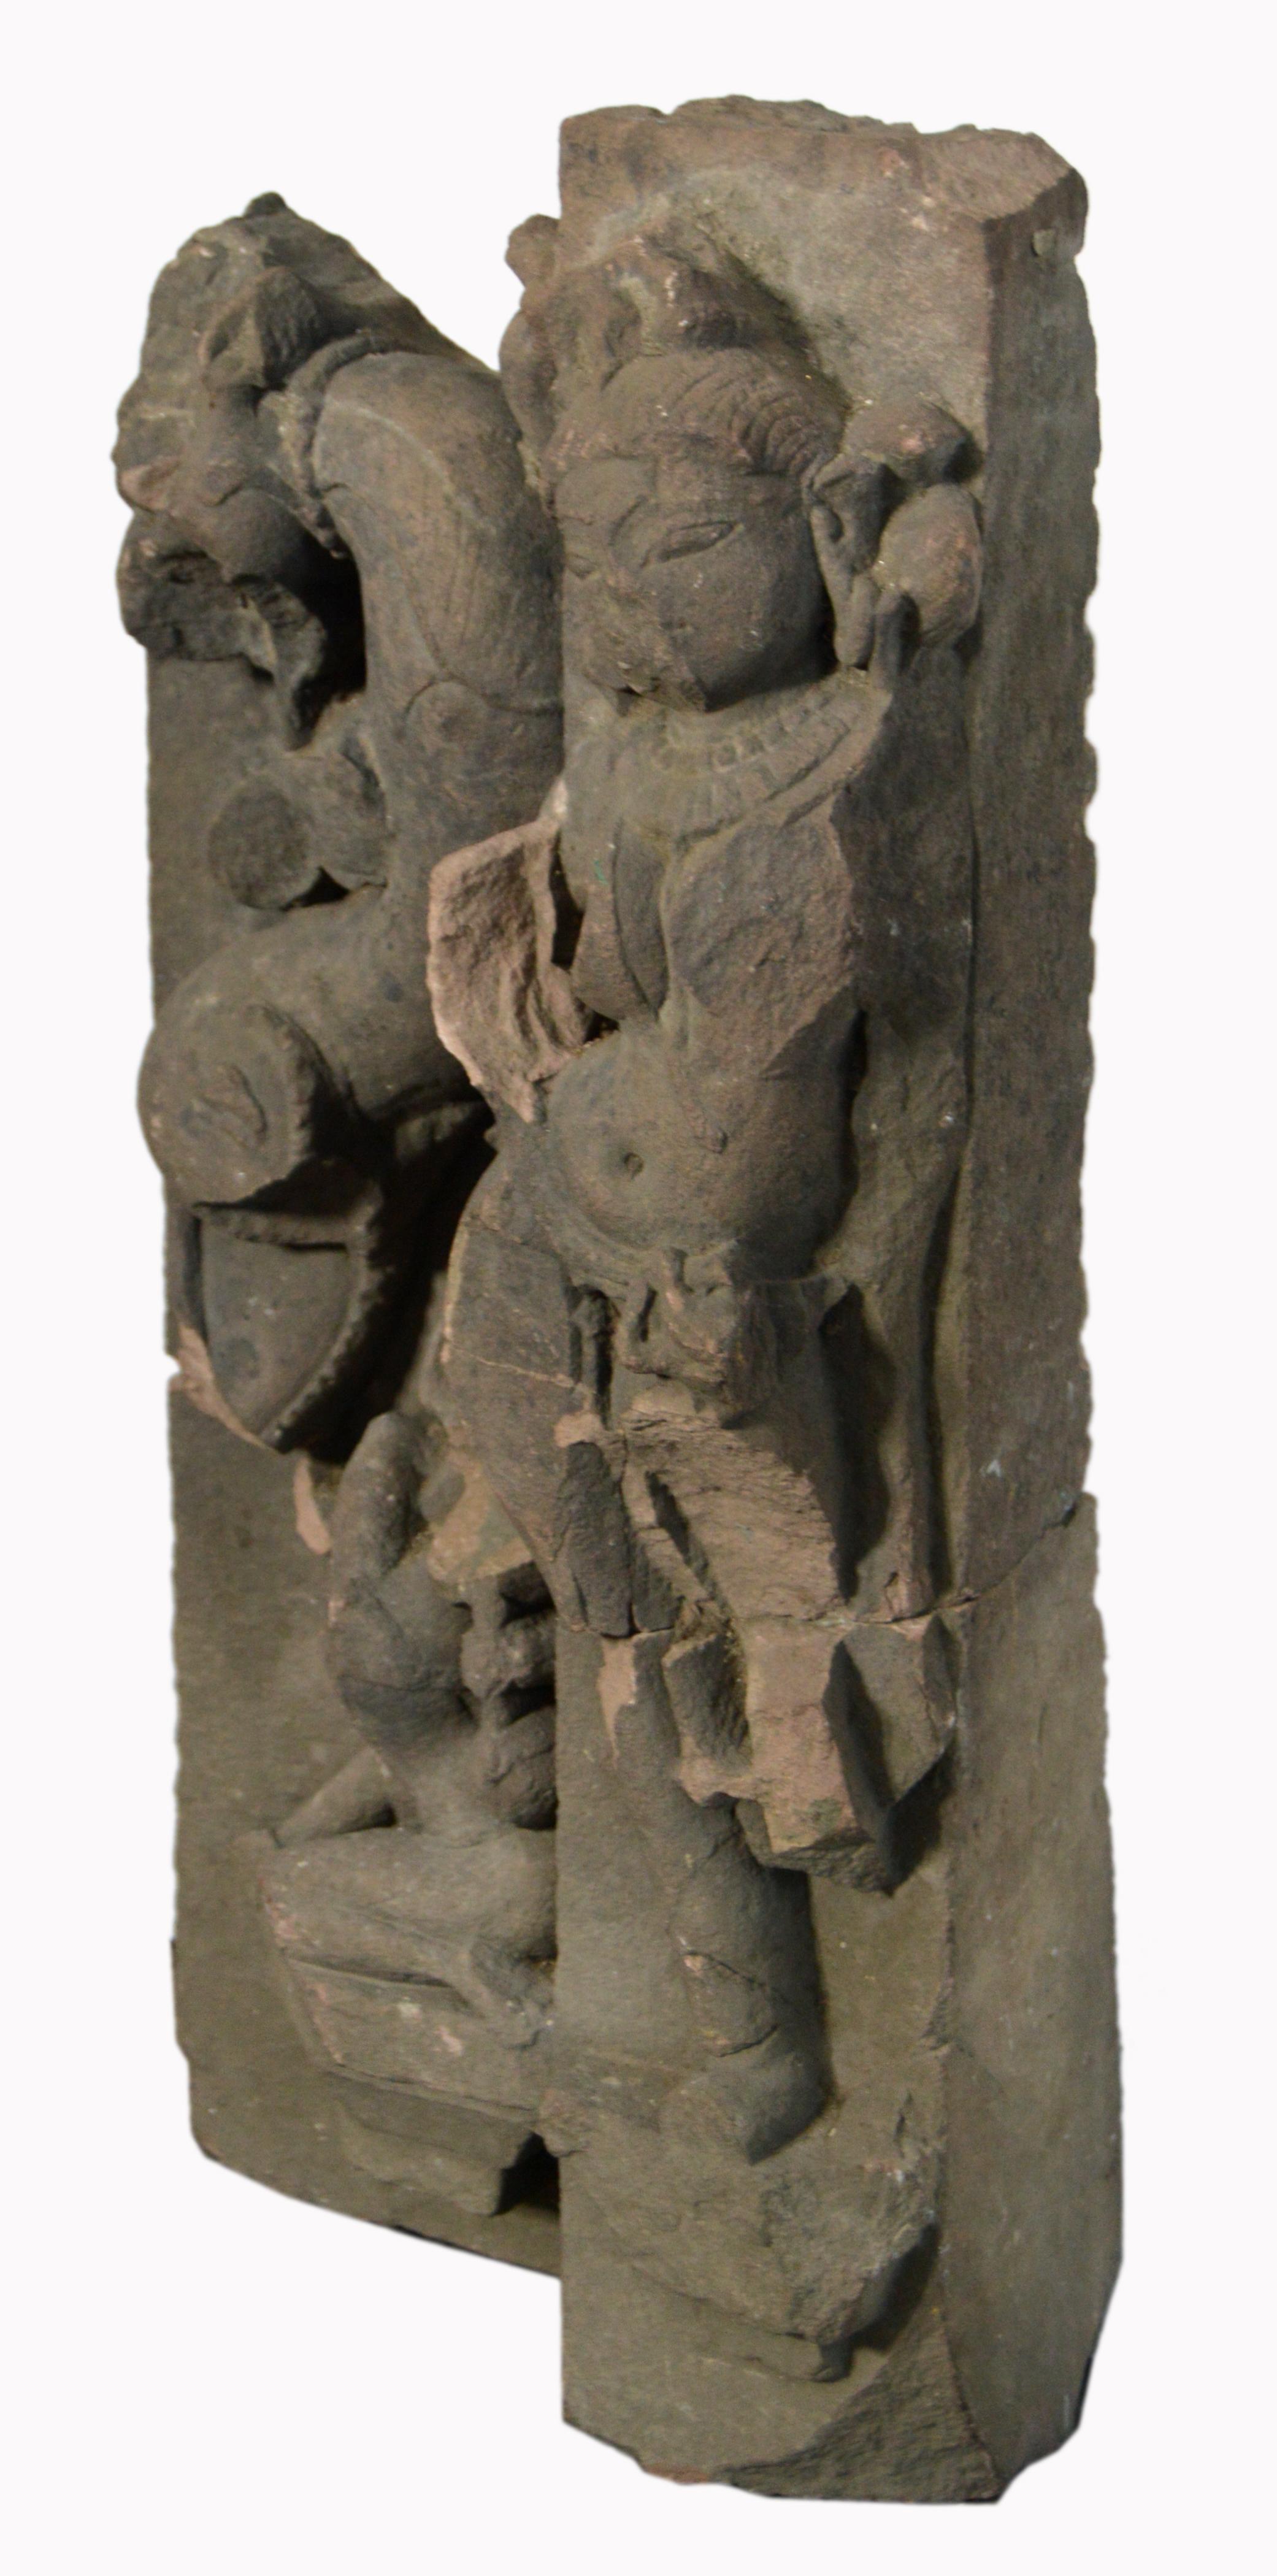 A 17th century Asia hand-carved stone temple sculpture possibly from India, depicting a divinity. Featuring a strong patina revealing its age, this high-relief hand-carved stone sculpture was adorning the walls of a temple, possibly in India. A